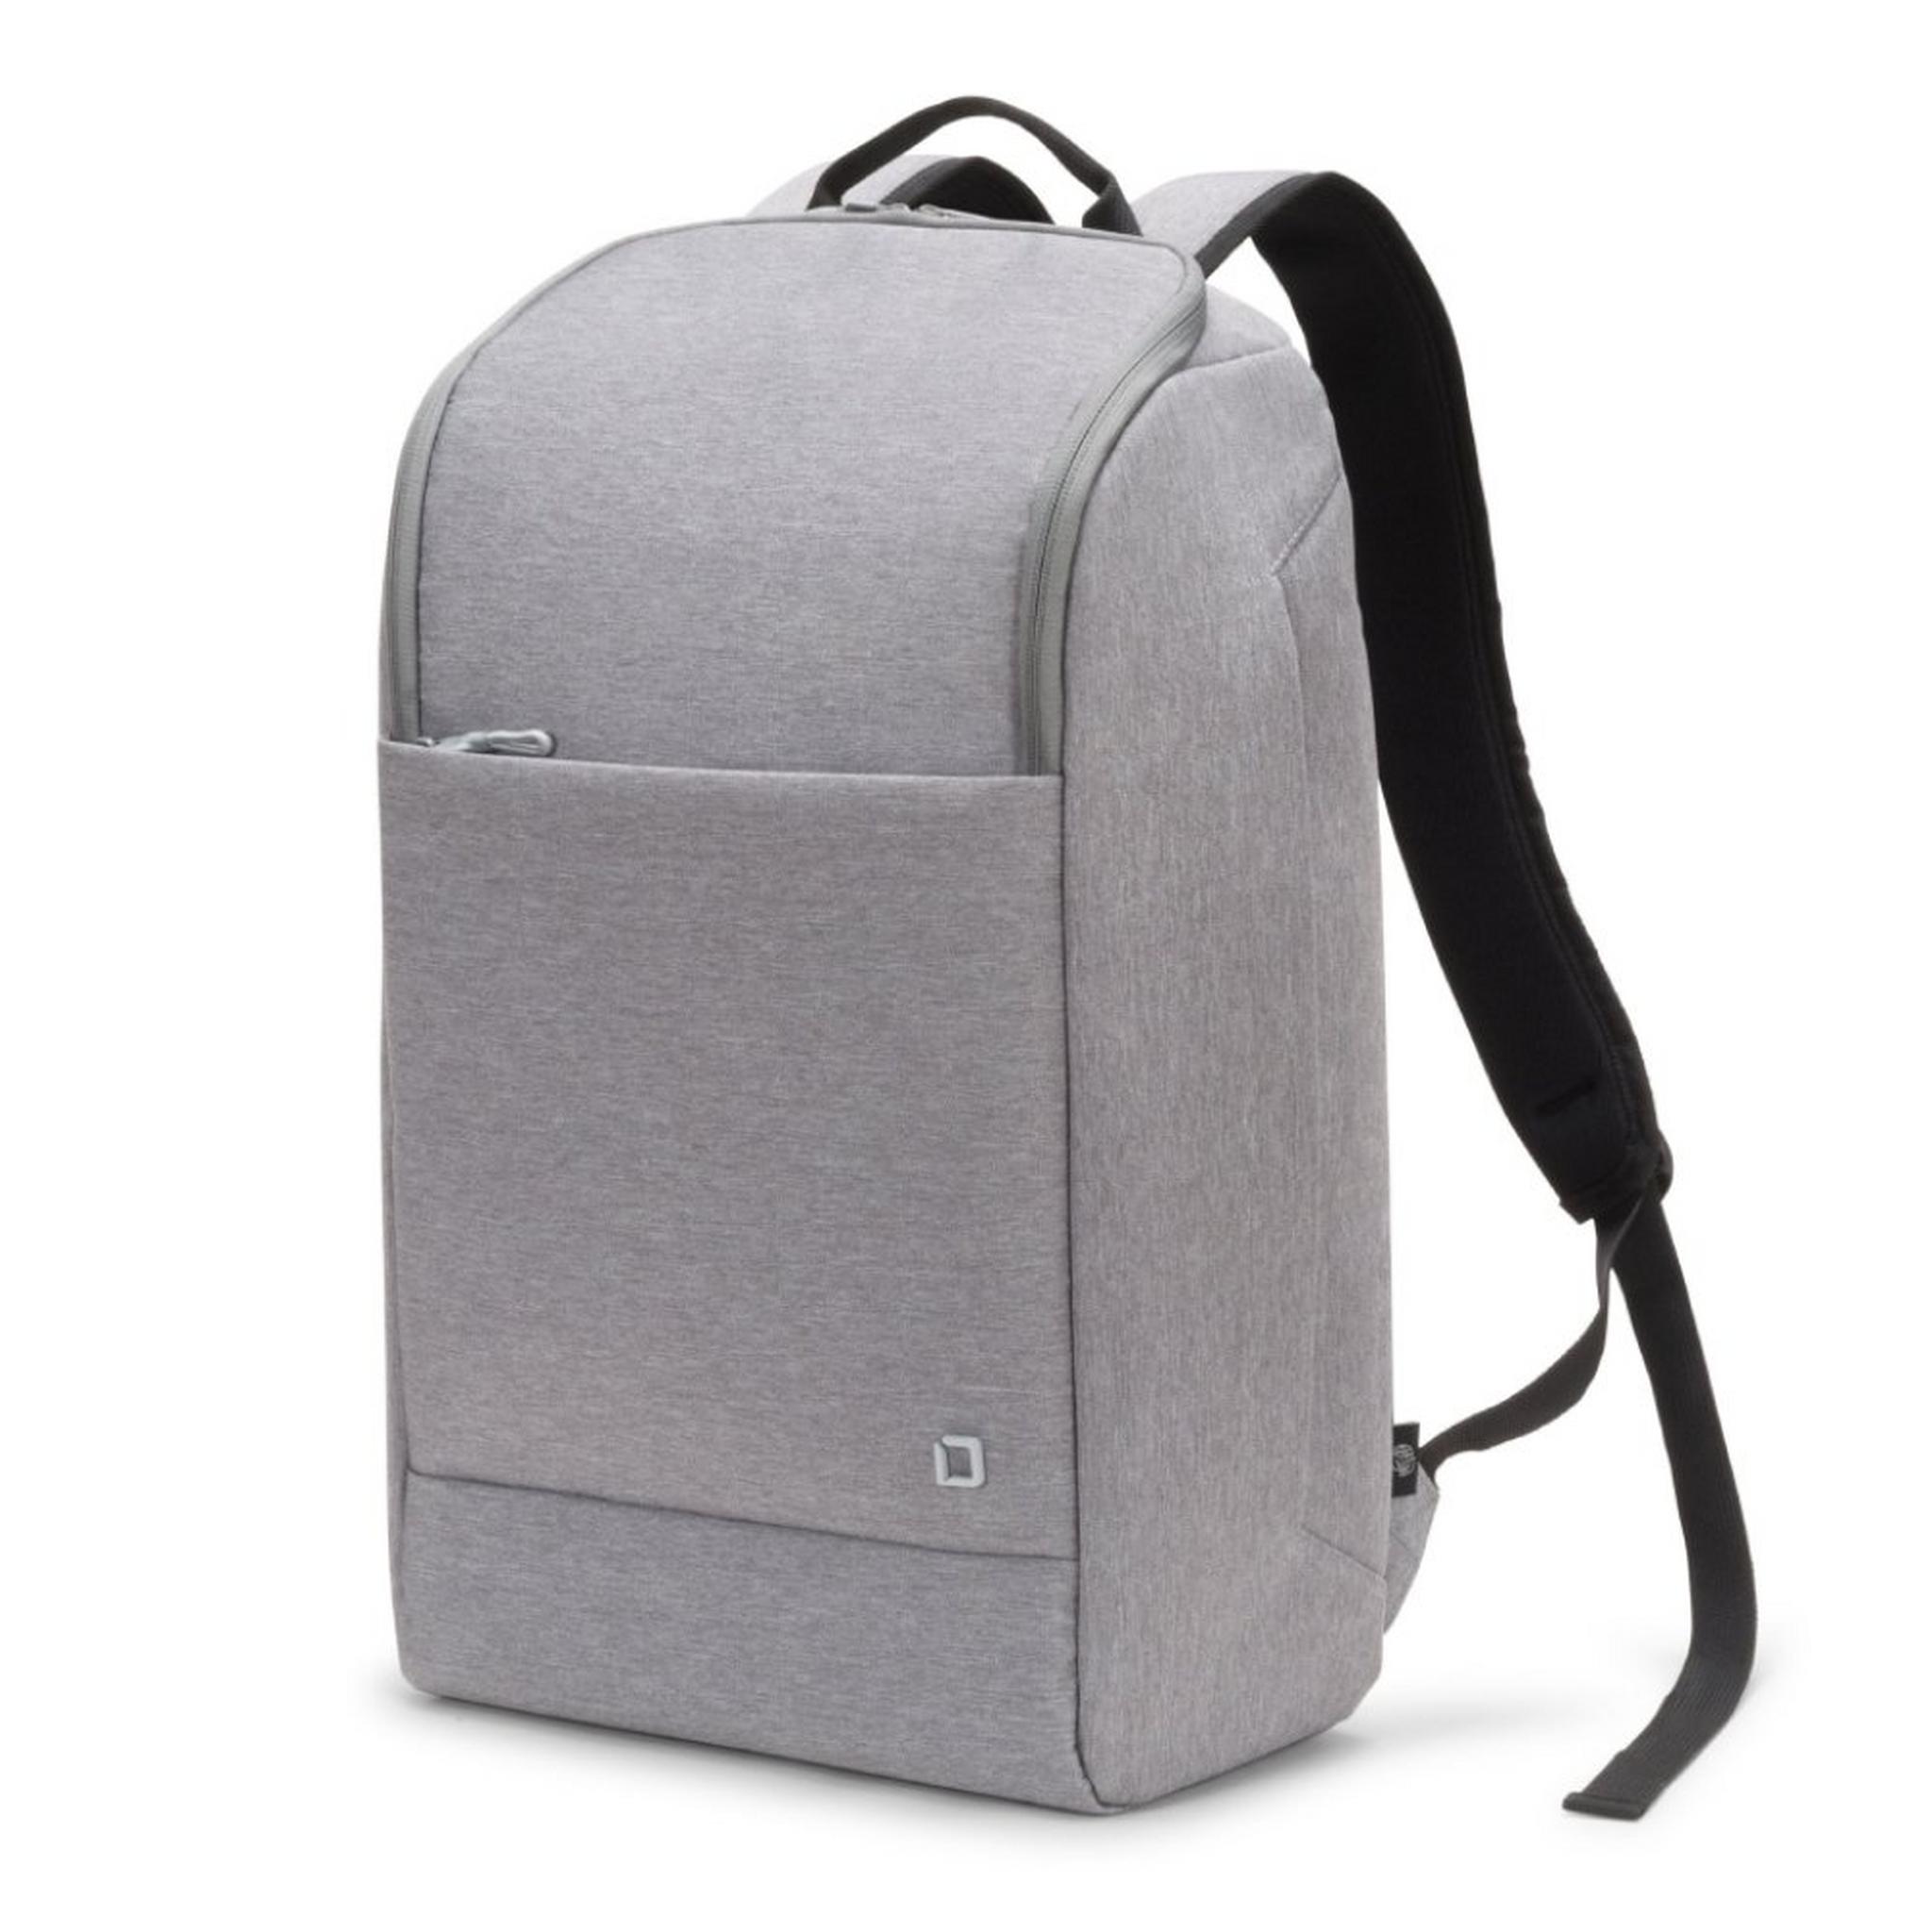 Dicota Eco Motion Backpack for 15.6-inch Laptop - Grey